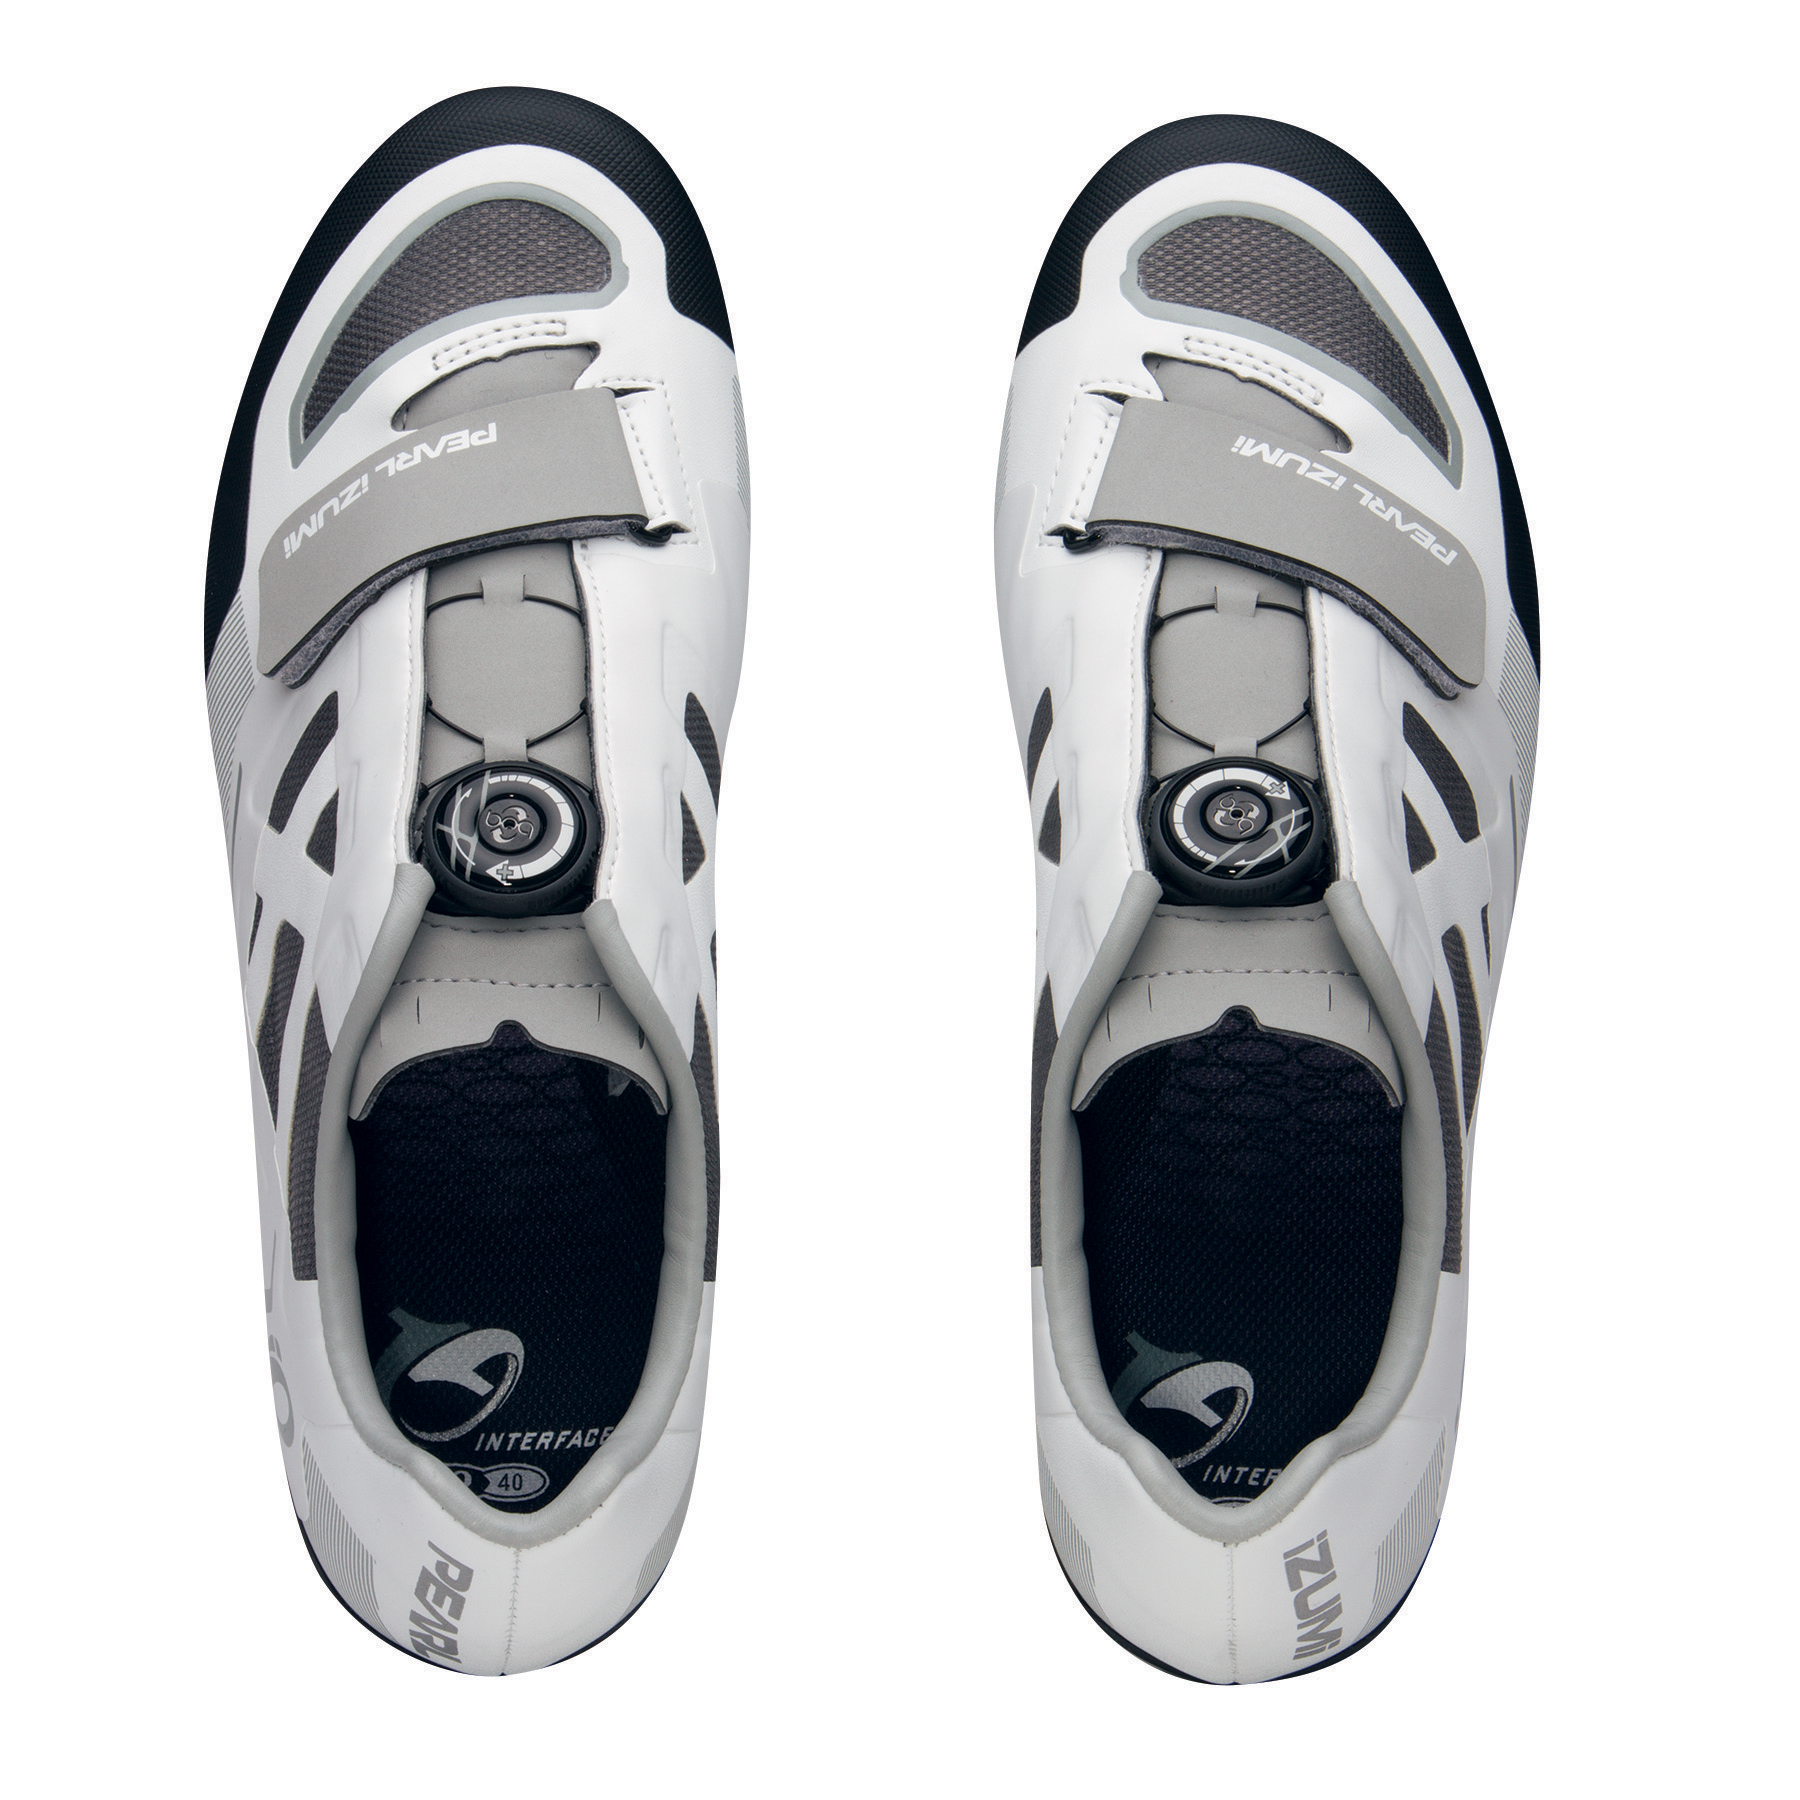 https://www.sefiles.net/images/library/zoom/pearl-izumi-x-project-2.0-mtb-shoes-womens-225128-15.jpg